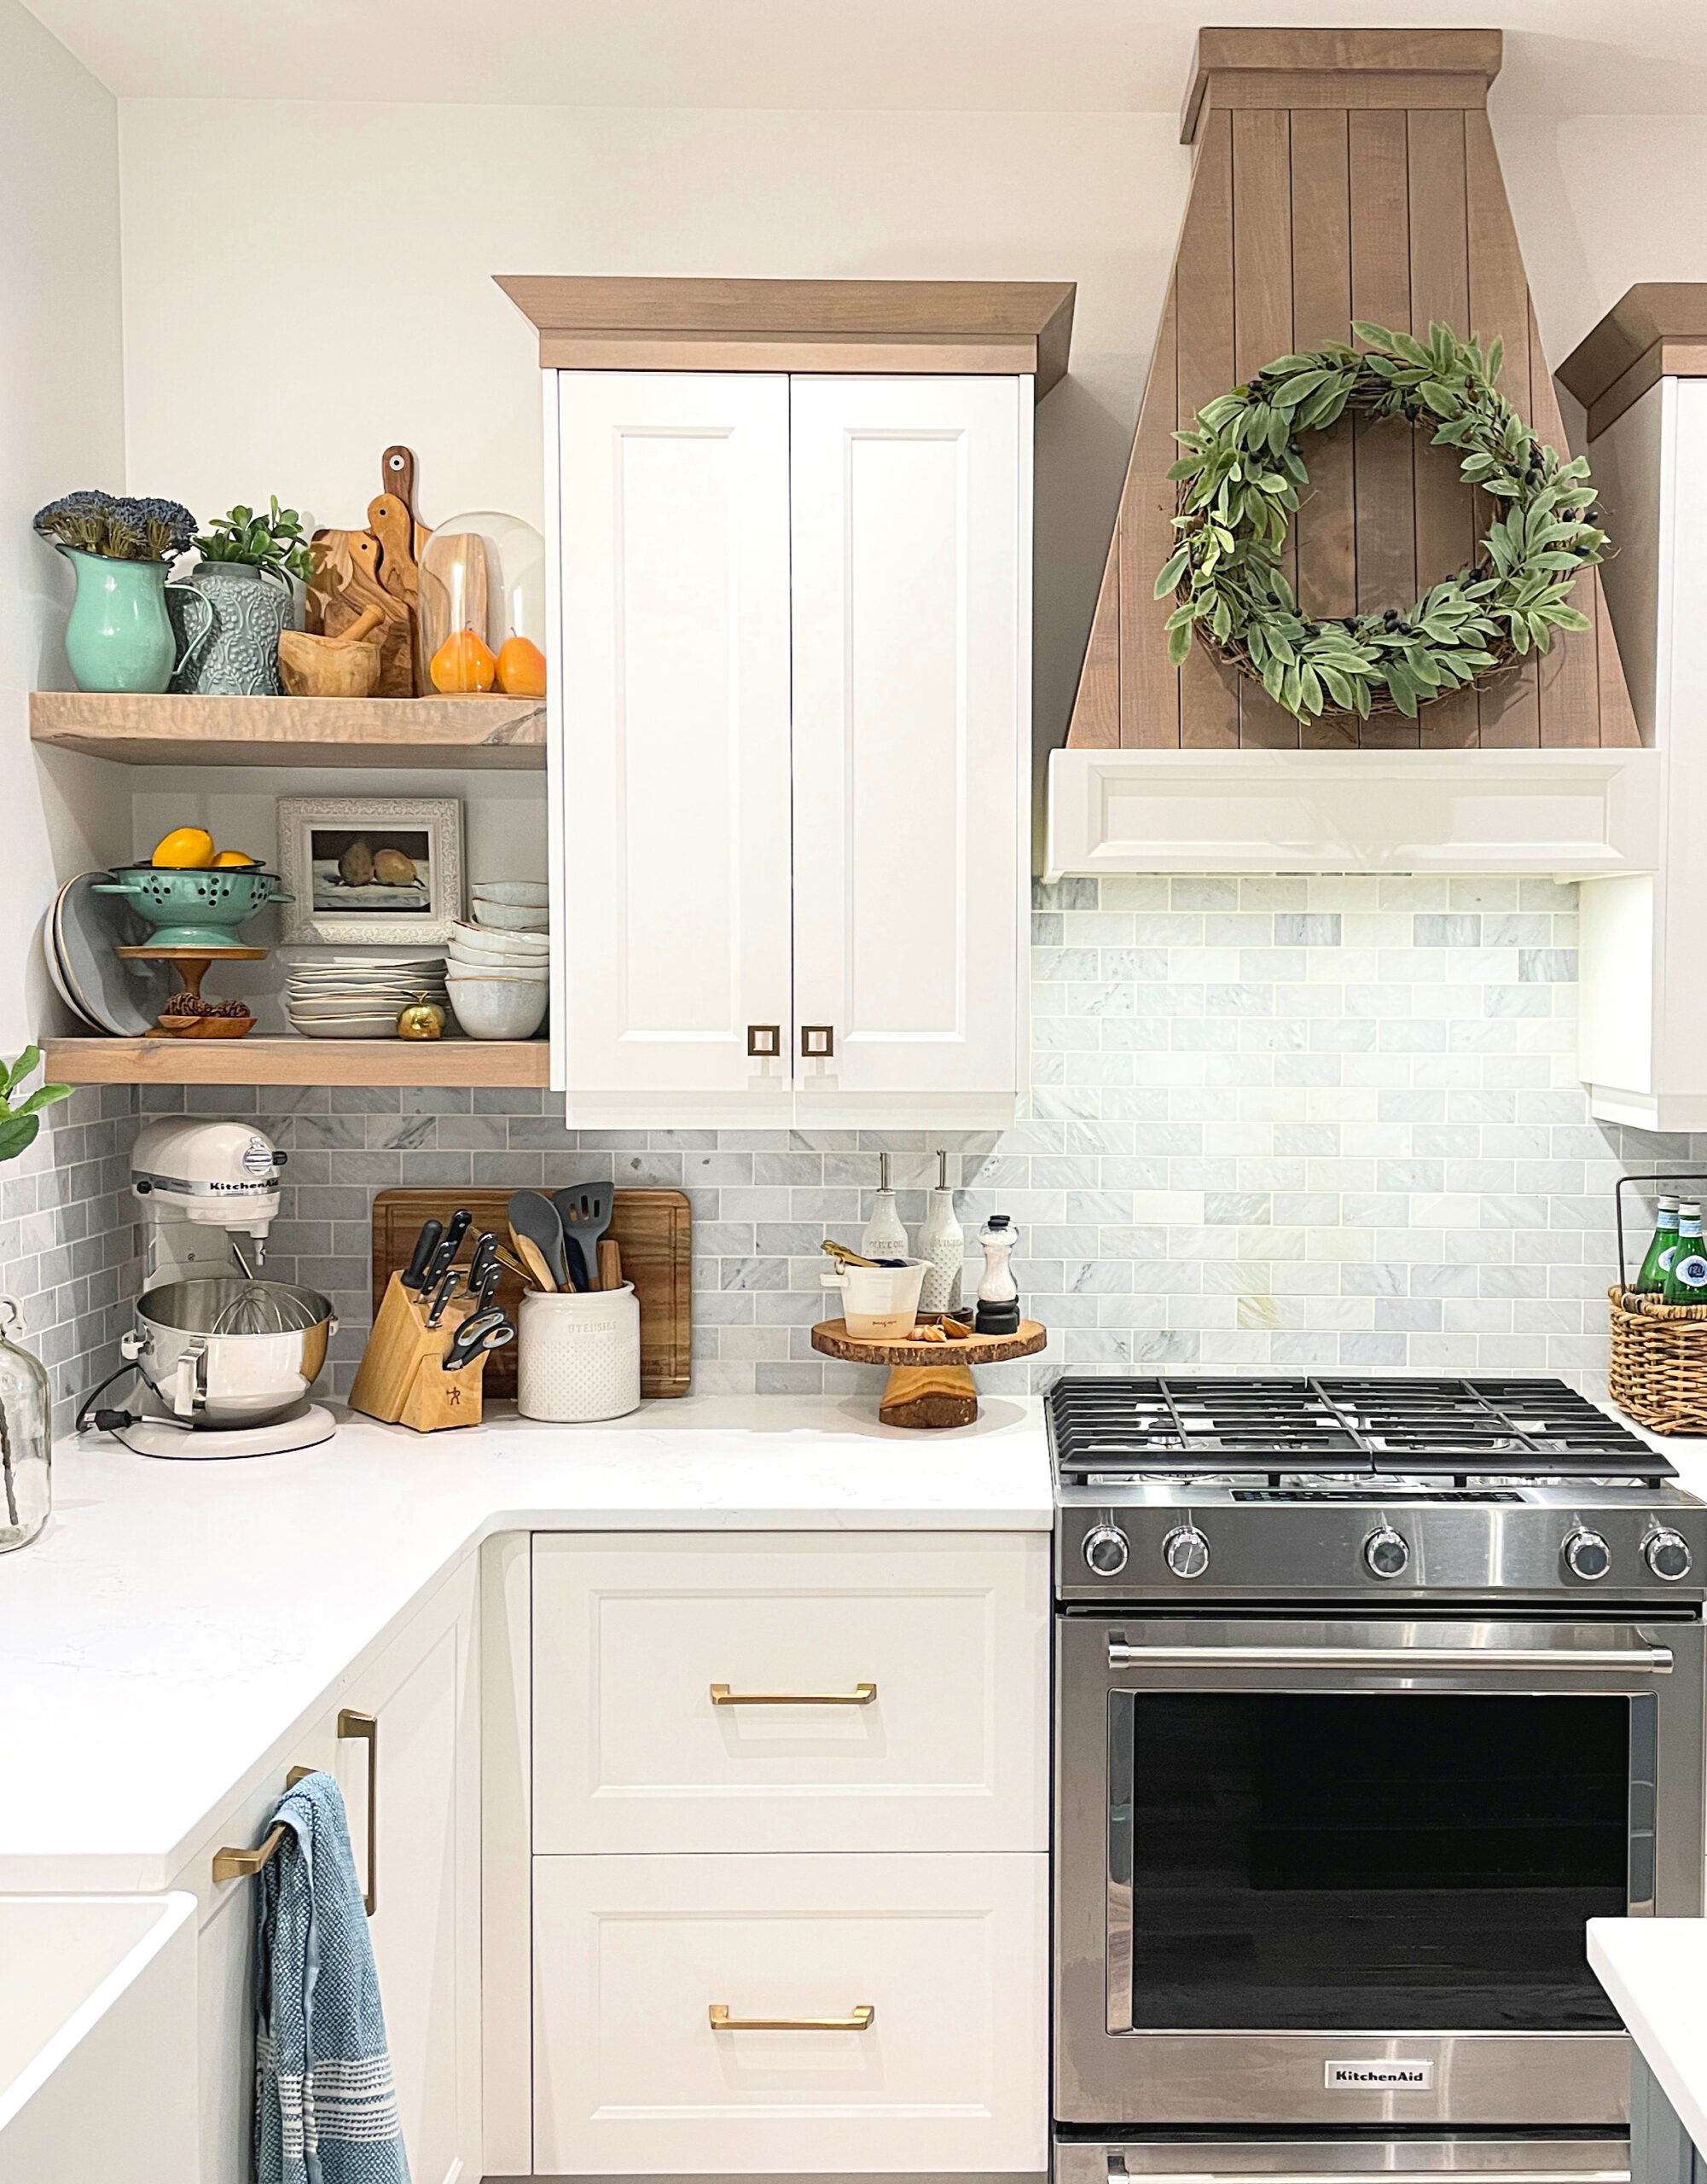 An Insanely Organized Person Helped Me Overhaul My Kitchen